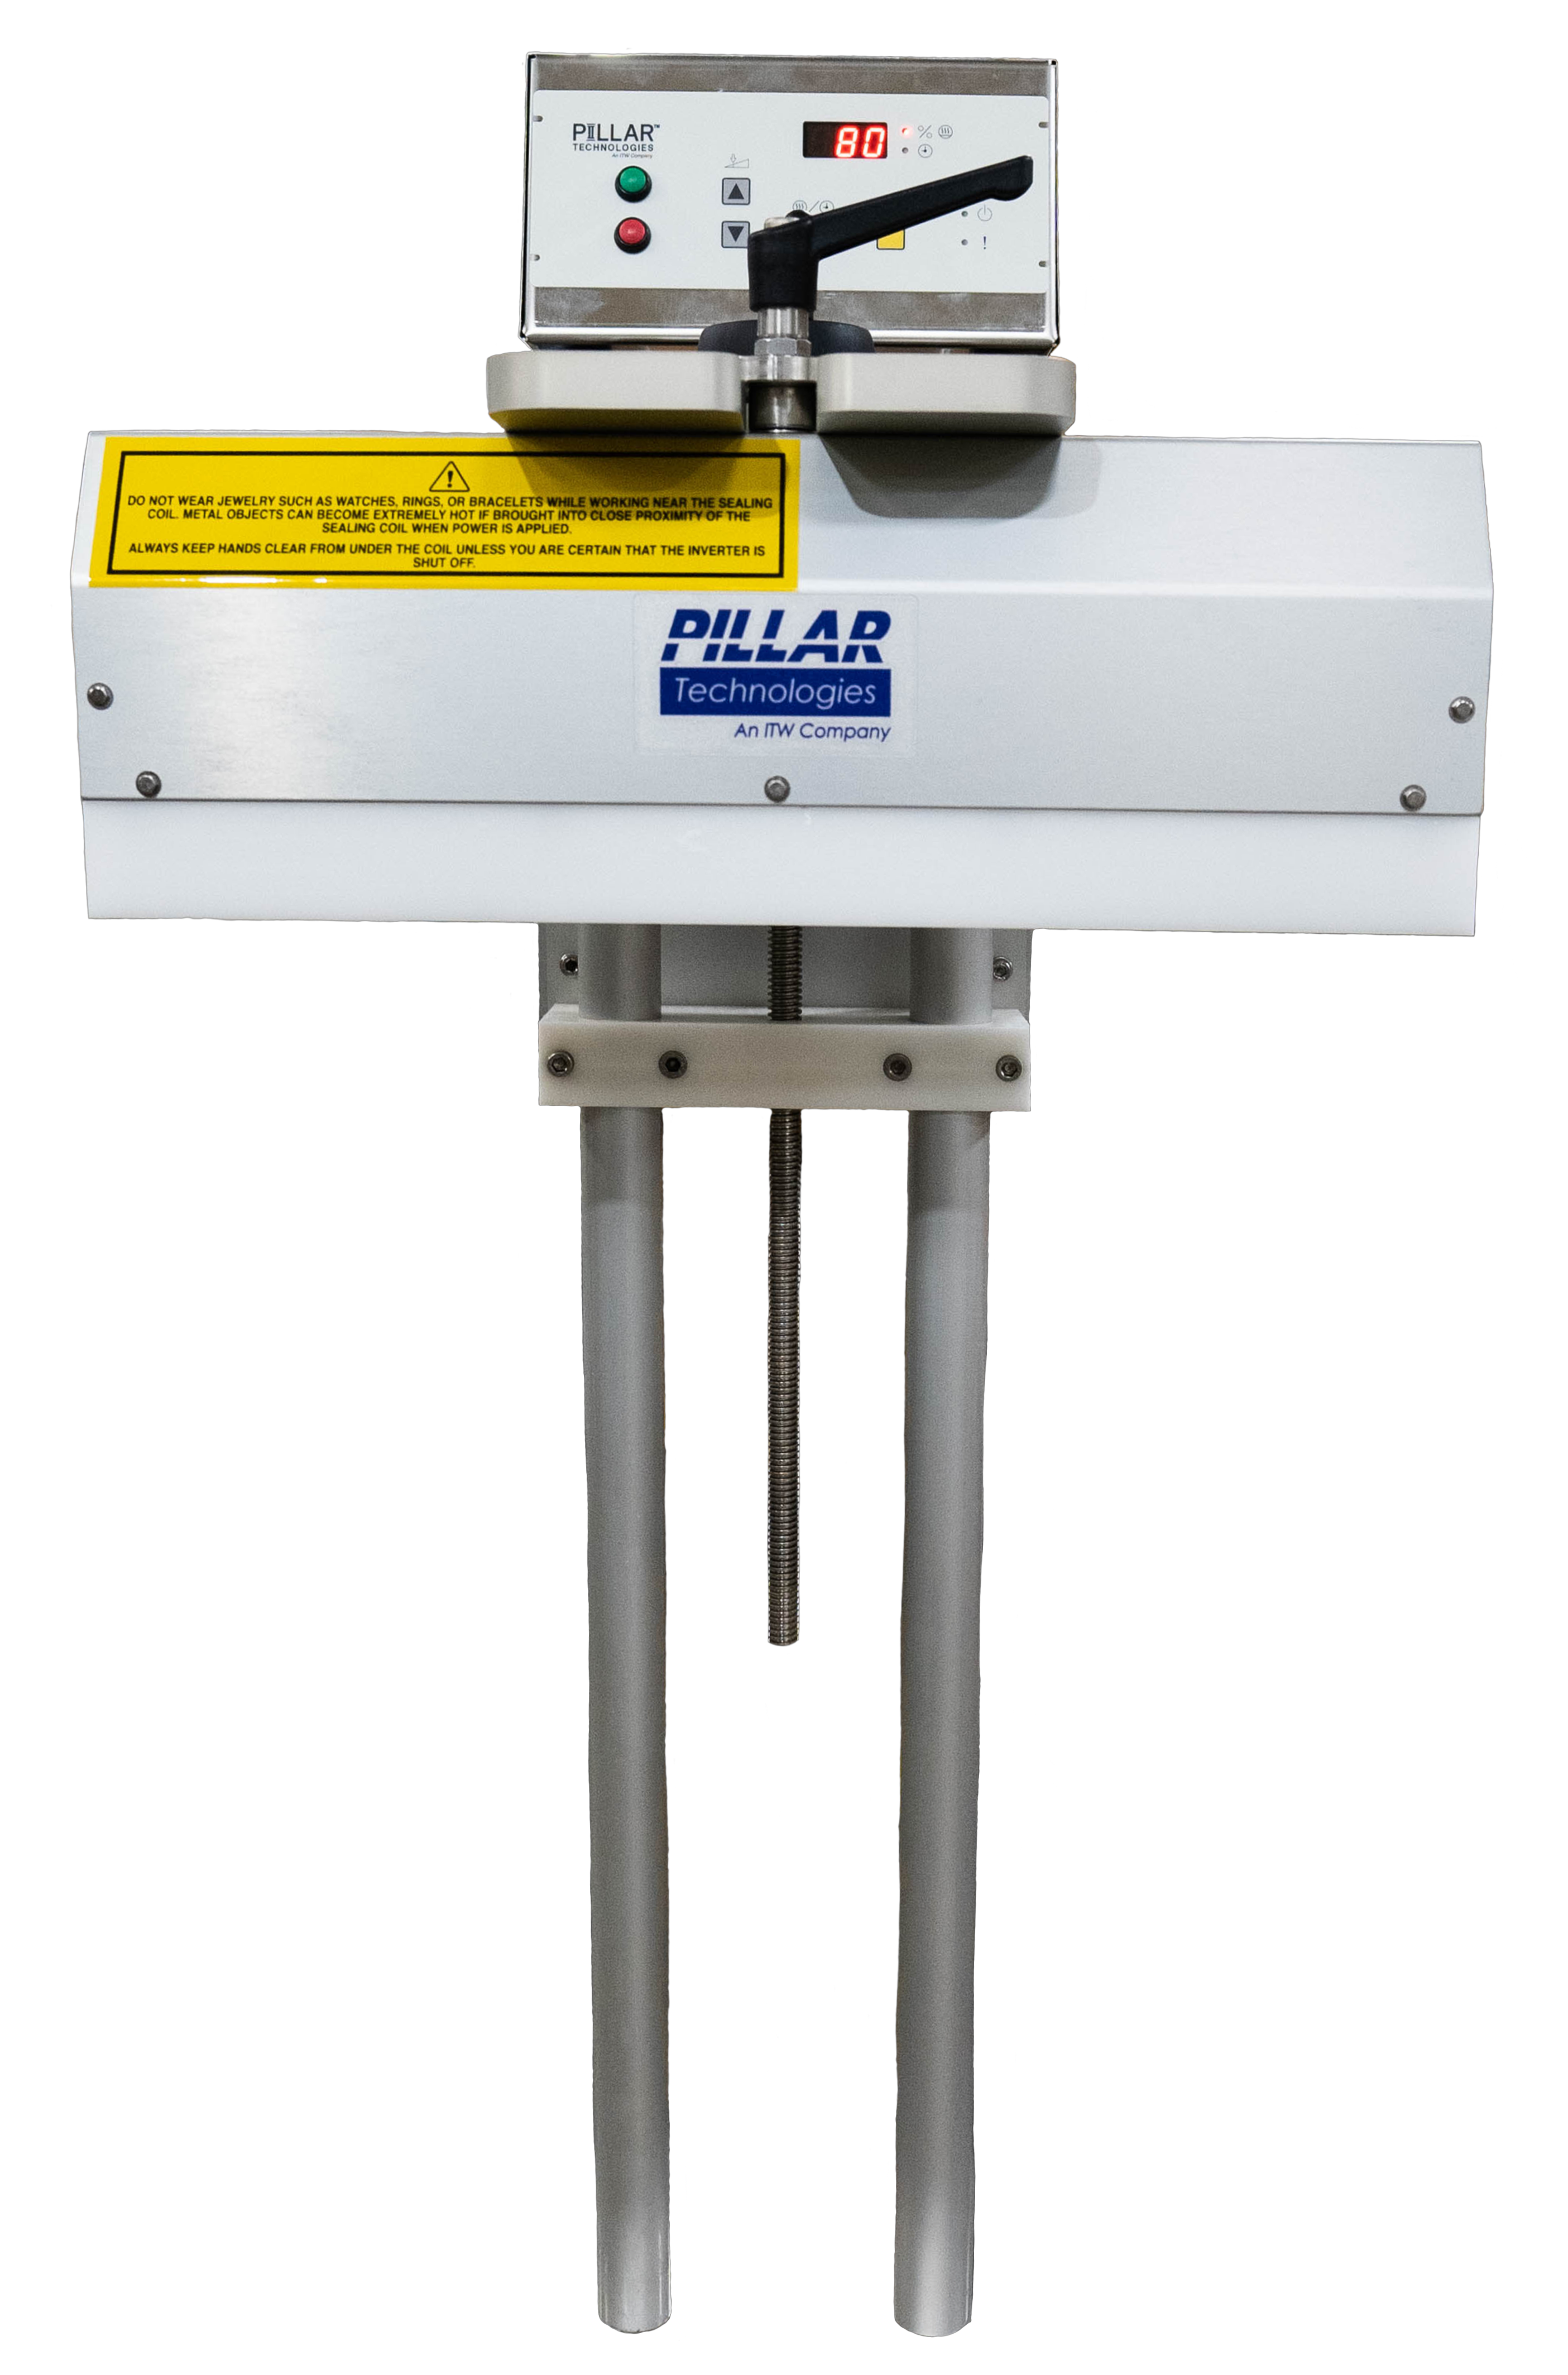 Pillar Technologies: CS1 Induction Sealer for Highly Efficient and Effective Induction Sealing